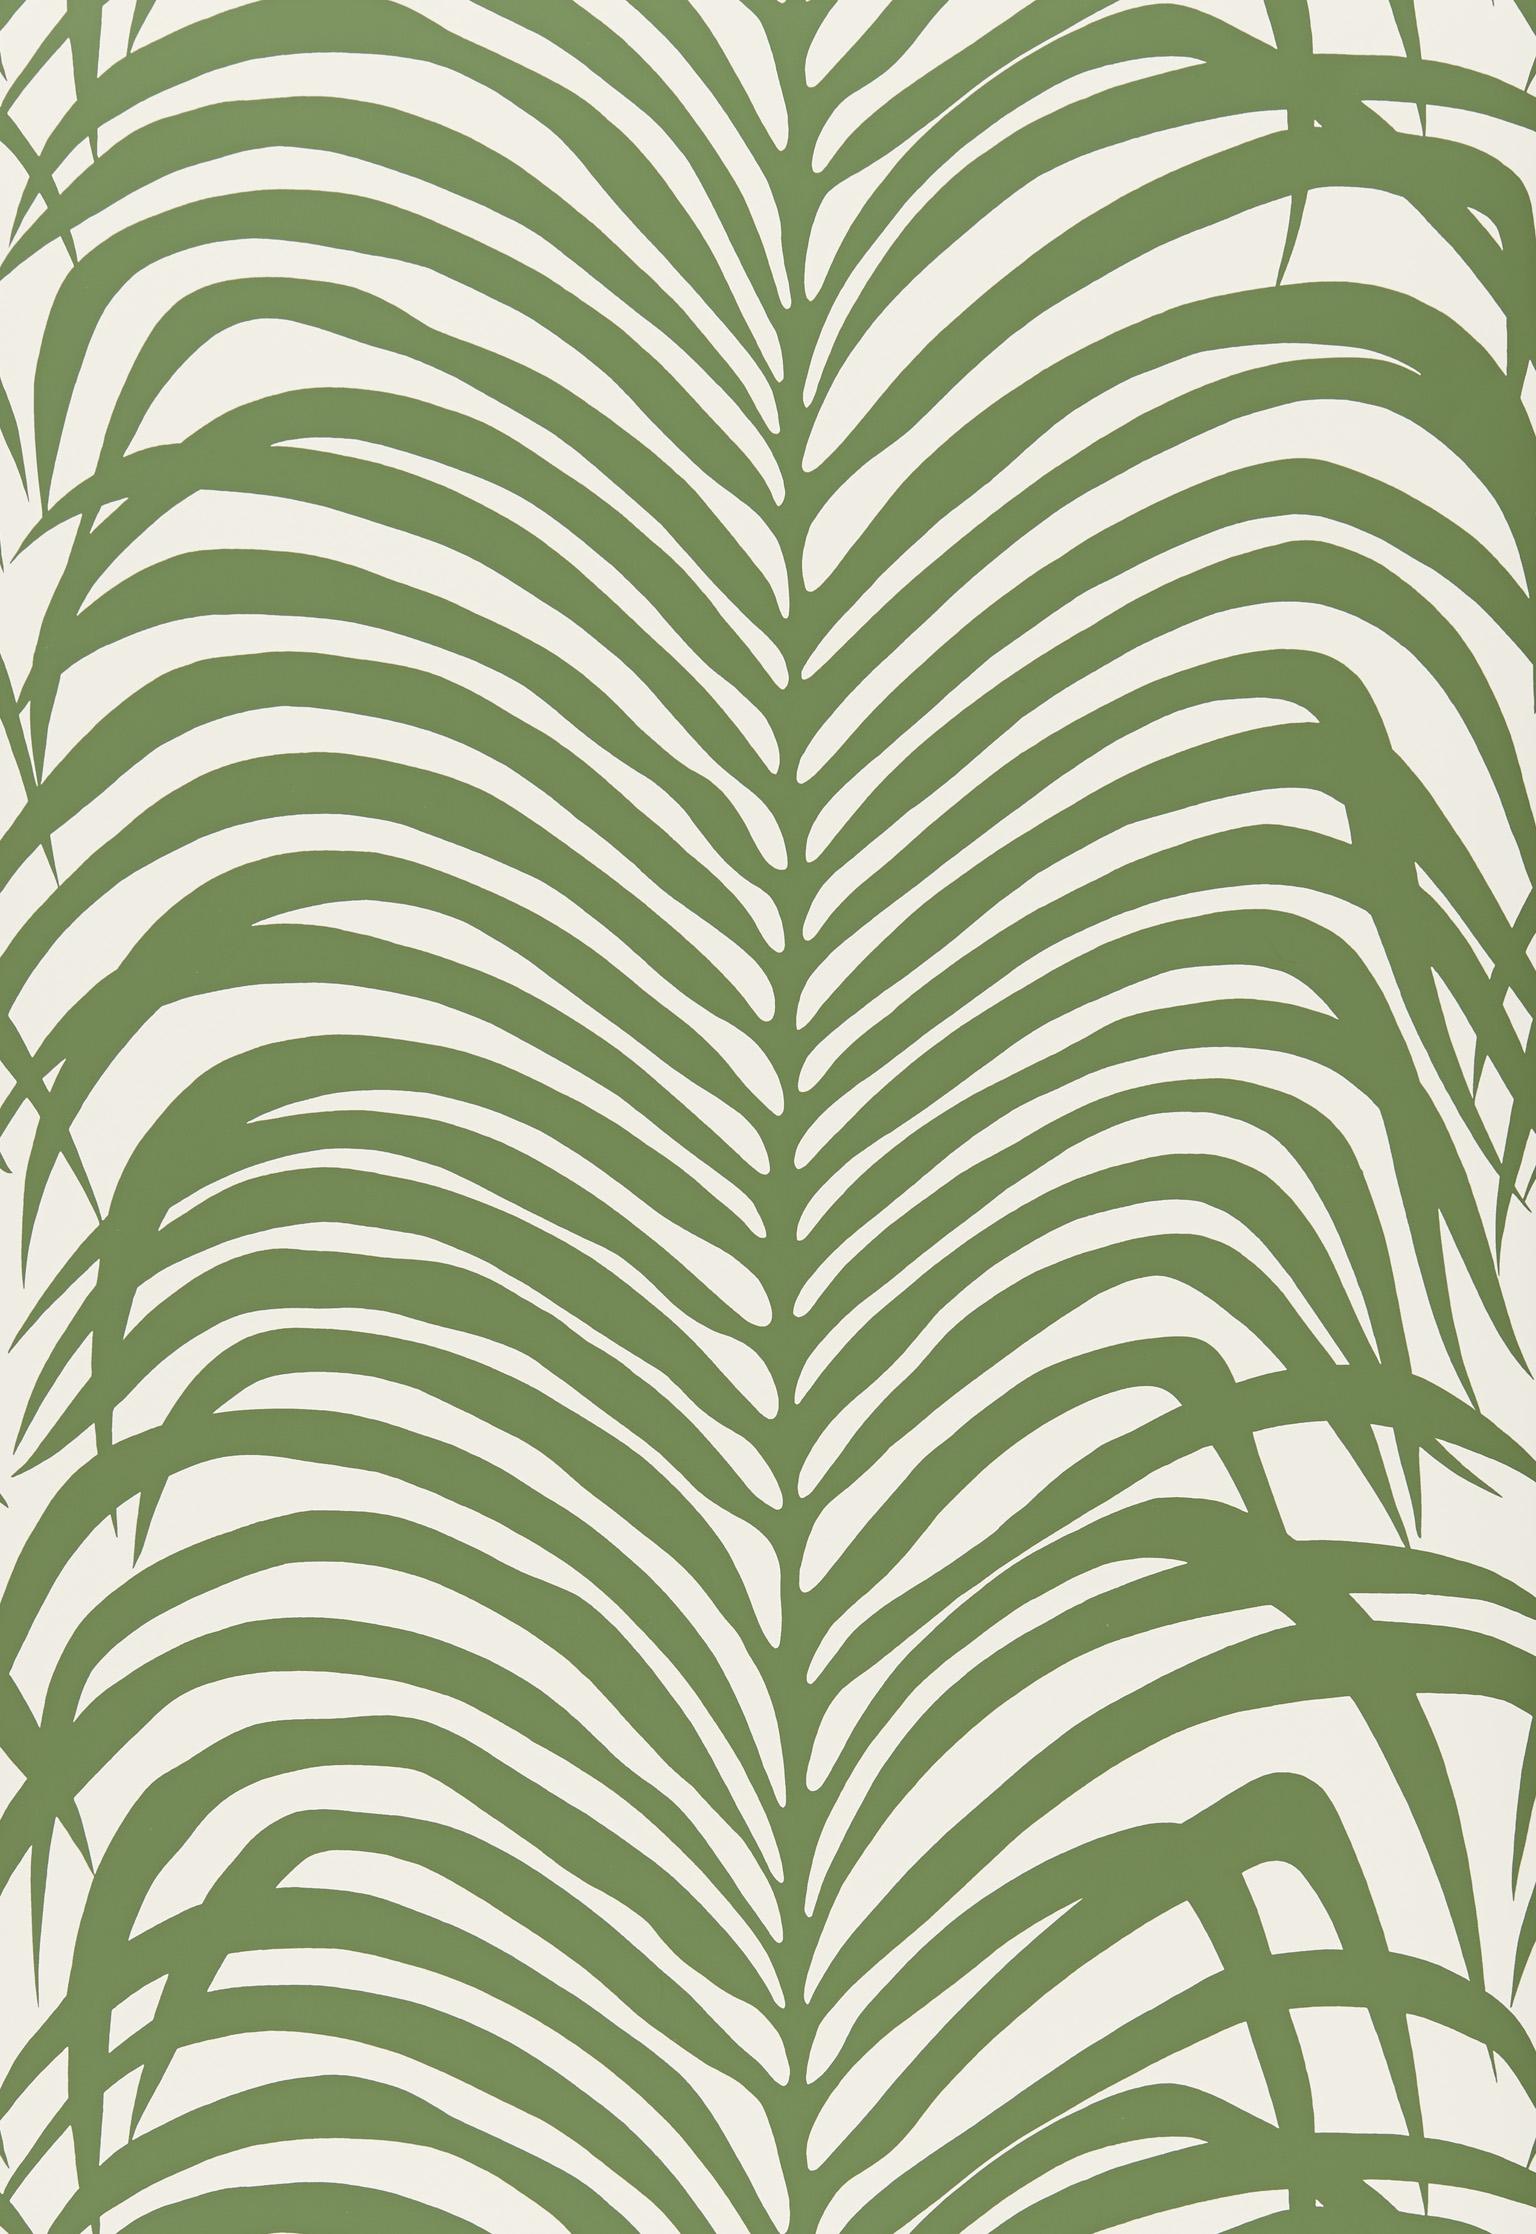 A striking hybrid that recalls both zebra stripes and tropical palm leaves, this wild and wonderful pattern is available as a fabric and a wallcovering.

Since Schumacher was founded in 1889, our family-owned company has been synonymous with style,